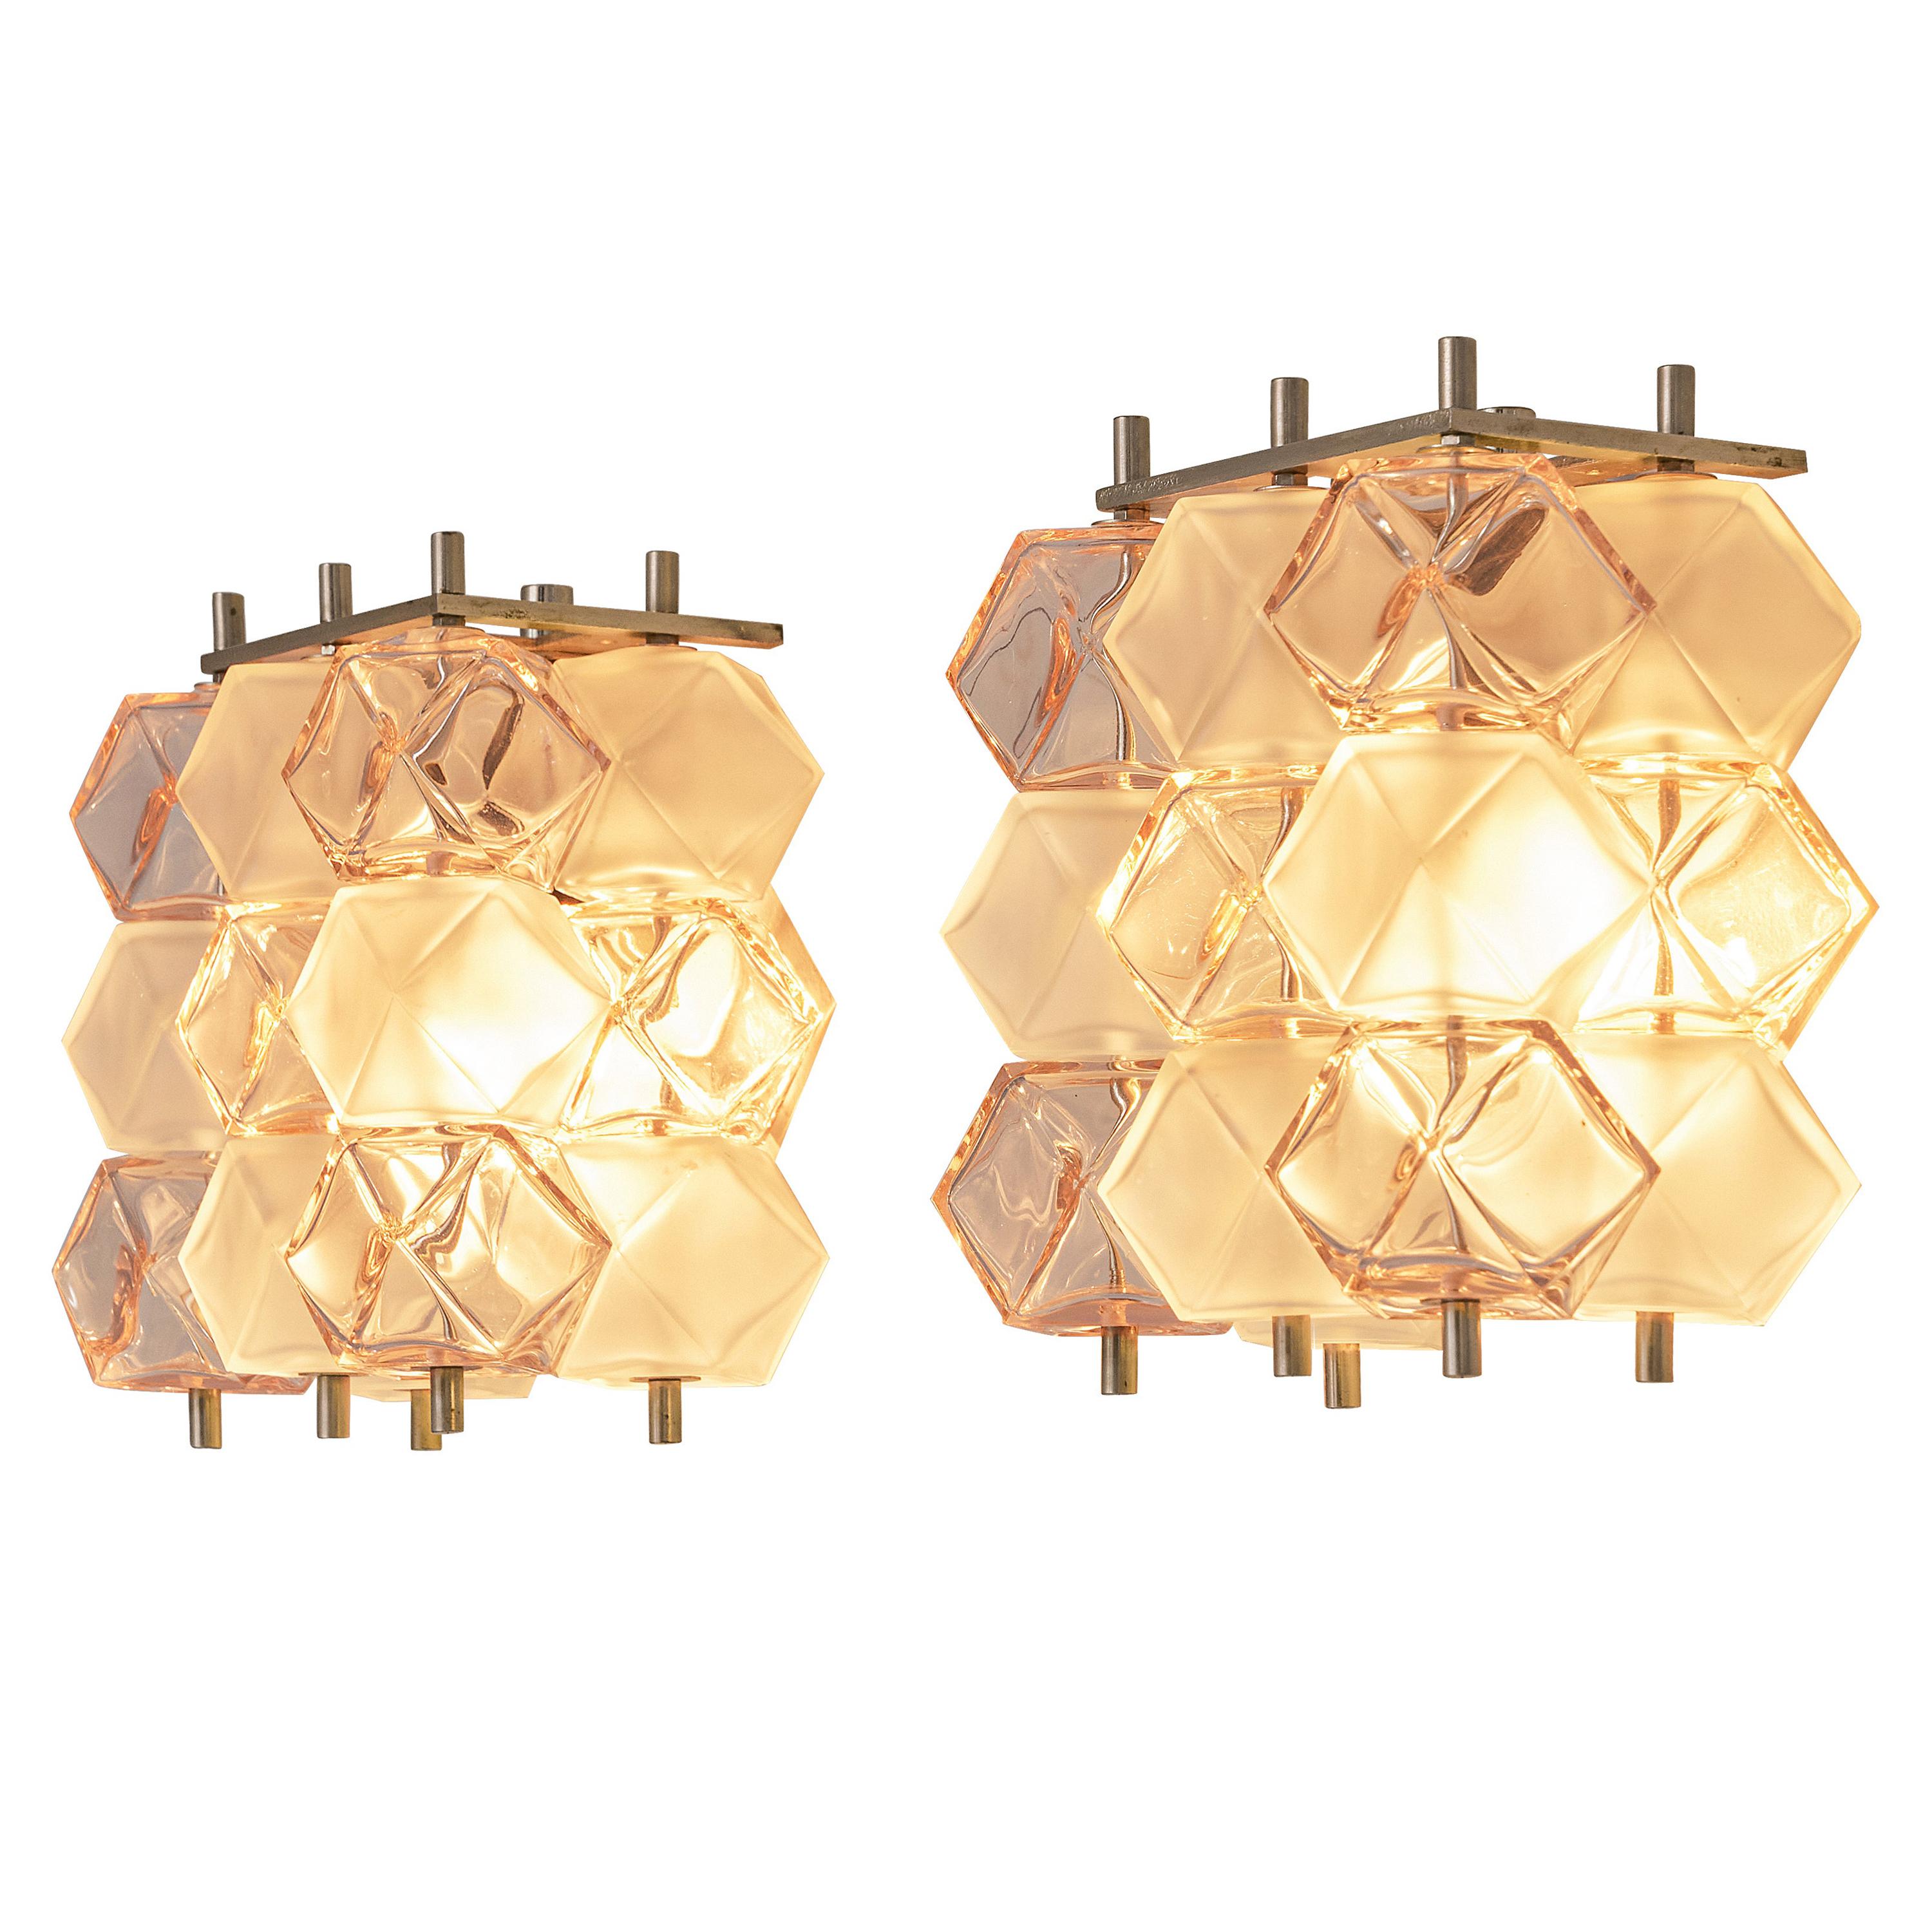 Postmodern Pair of Wall Lights in Bicolored Glass Cubes